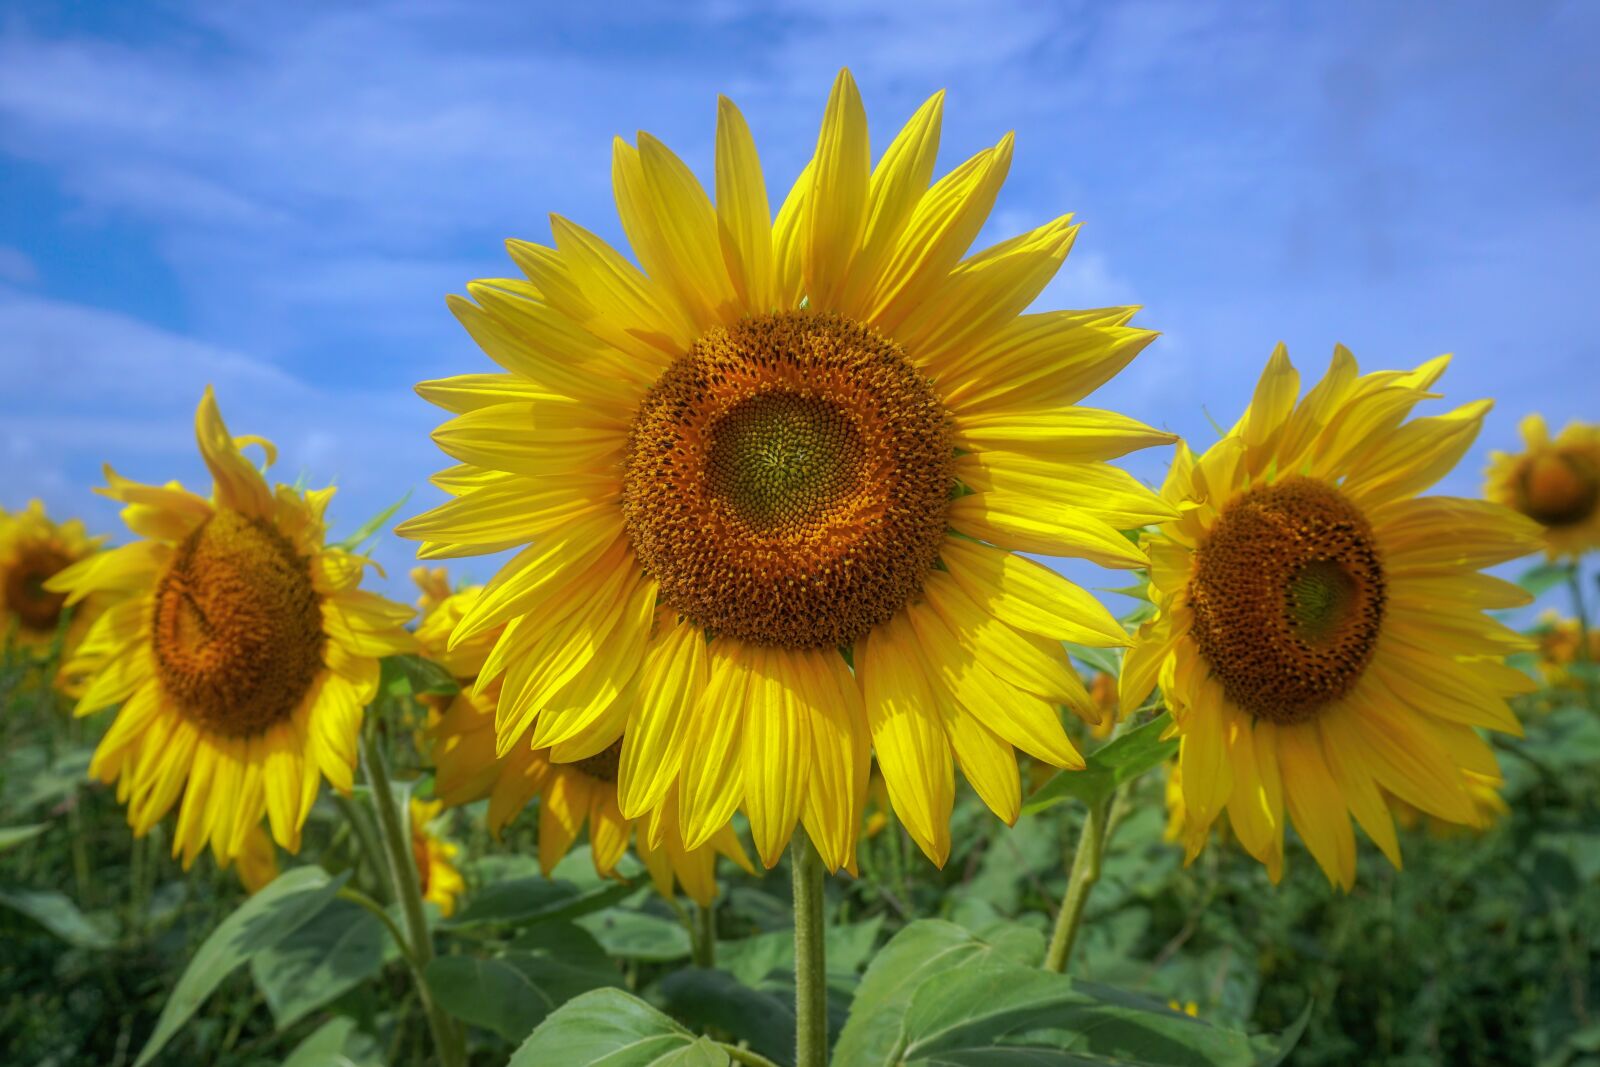 Sony a6300 sample photo. Sunflowers, yellow, bright photography